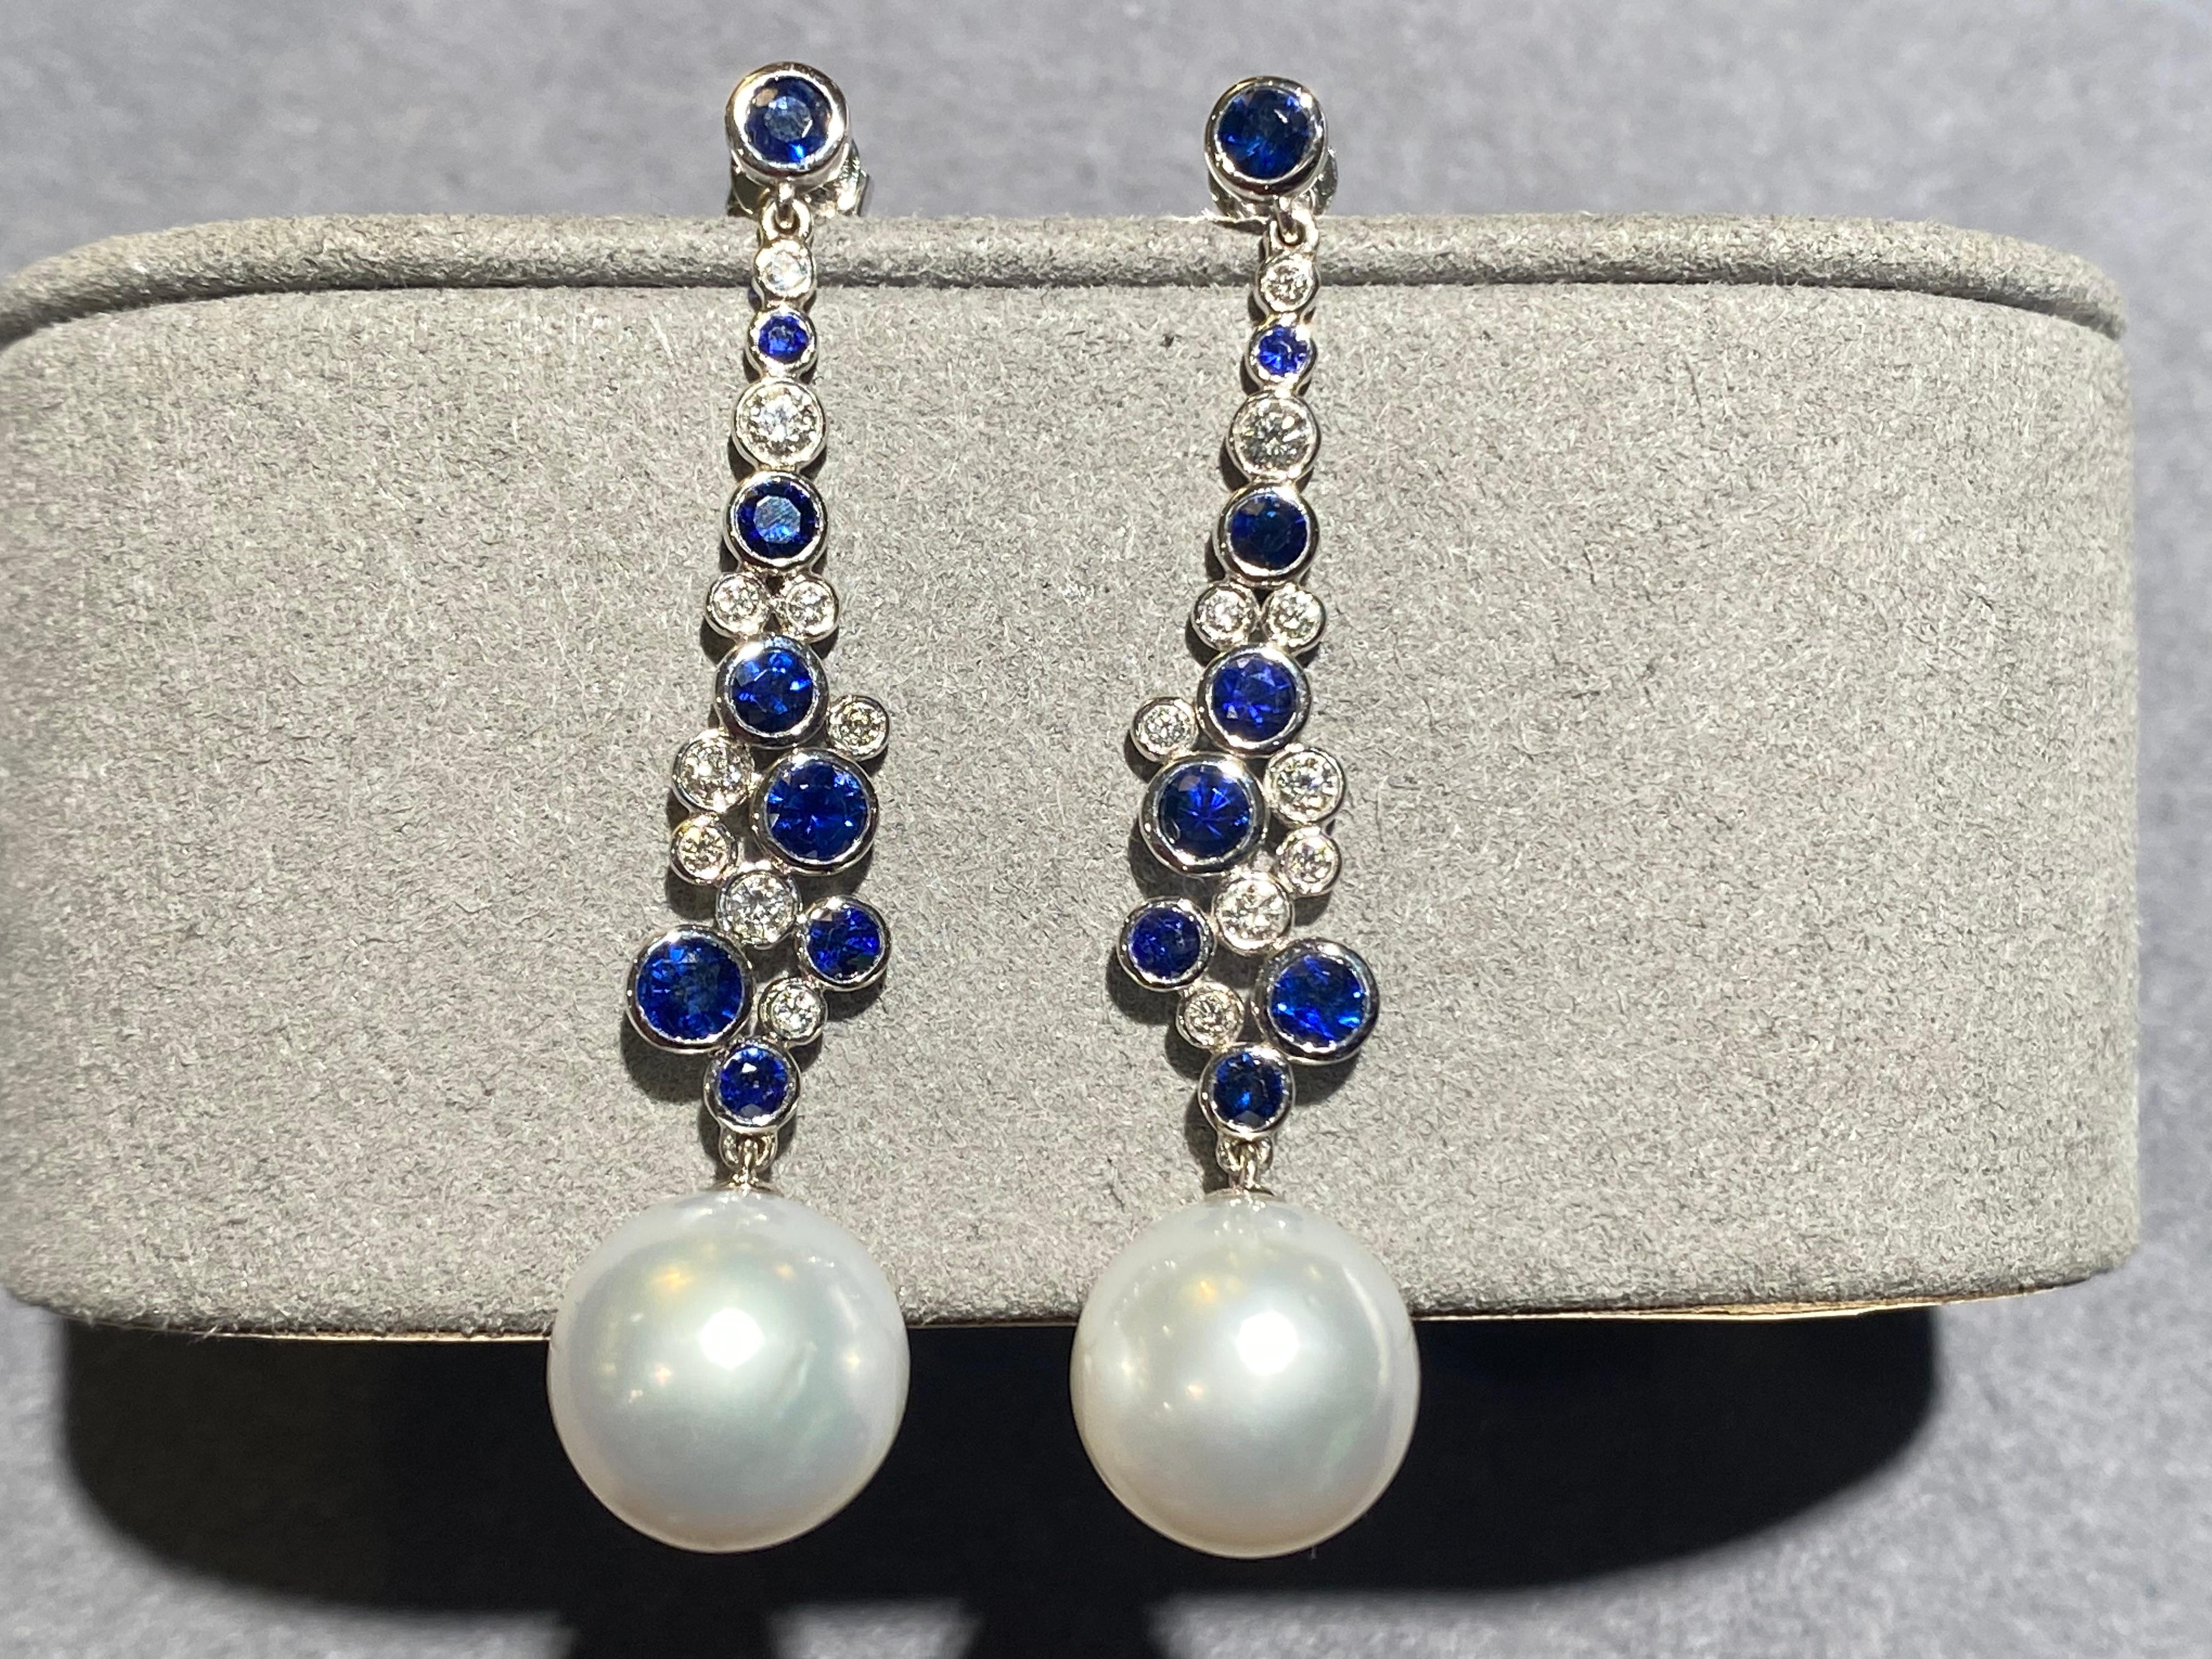 A pair of blue sapphire and diamond earrings in 18k white gold. The earrings is consists of a blue sapphire stud and it is then connected to the white Australian south sea pearl via 